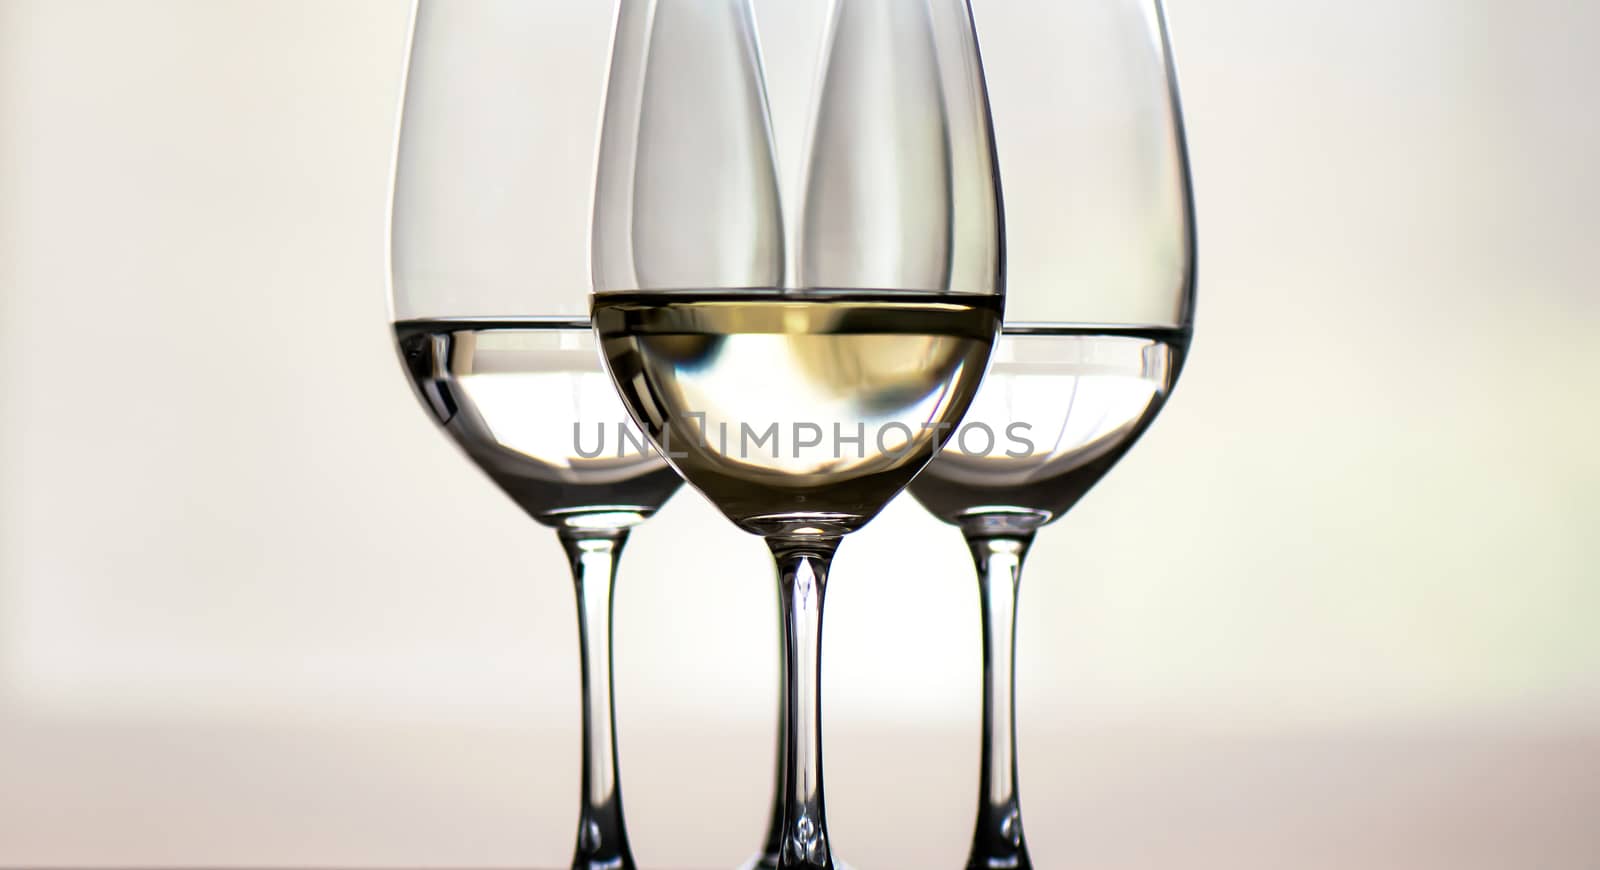 Four glasses of white wine, arranged symmetrically, focus on the middle one